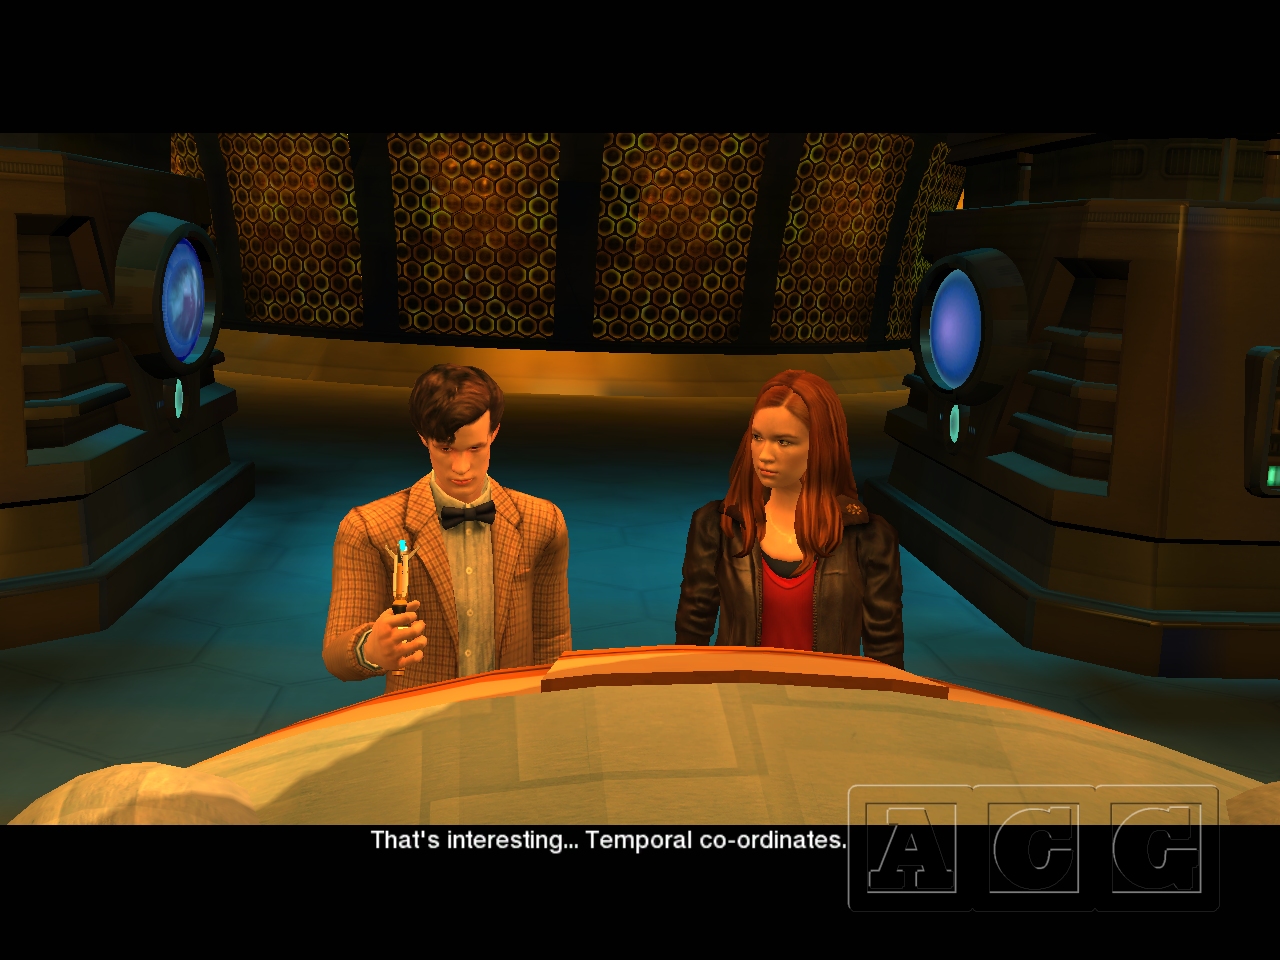 Doctor Who: The Adventure Games: Episode One: City of the Daleks